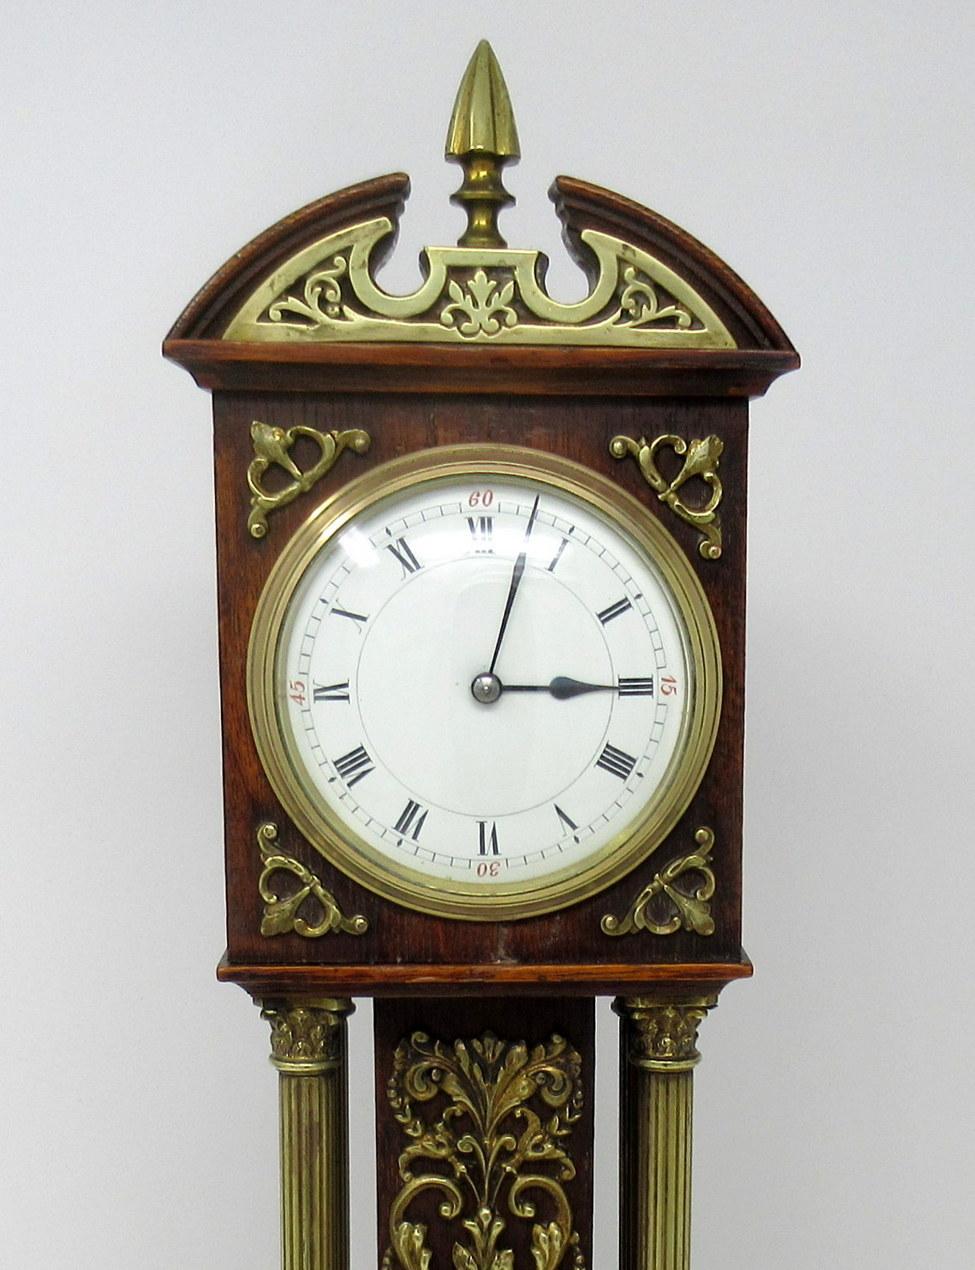 An Exceptionally fine English well figured oak miniature longcase mantle clock of outstanding quality, with lavish polished brass decorative mounts, last quarter of the 19th century. 

The central main support with lavish cast polish brass mounts